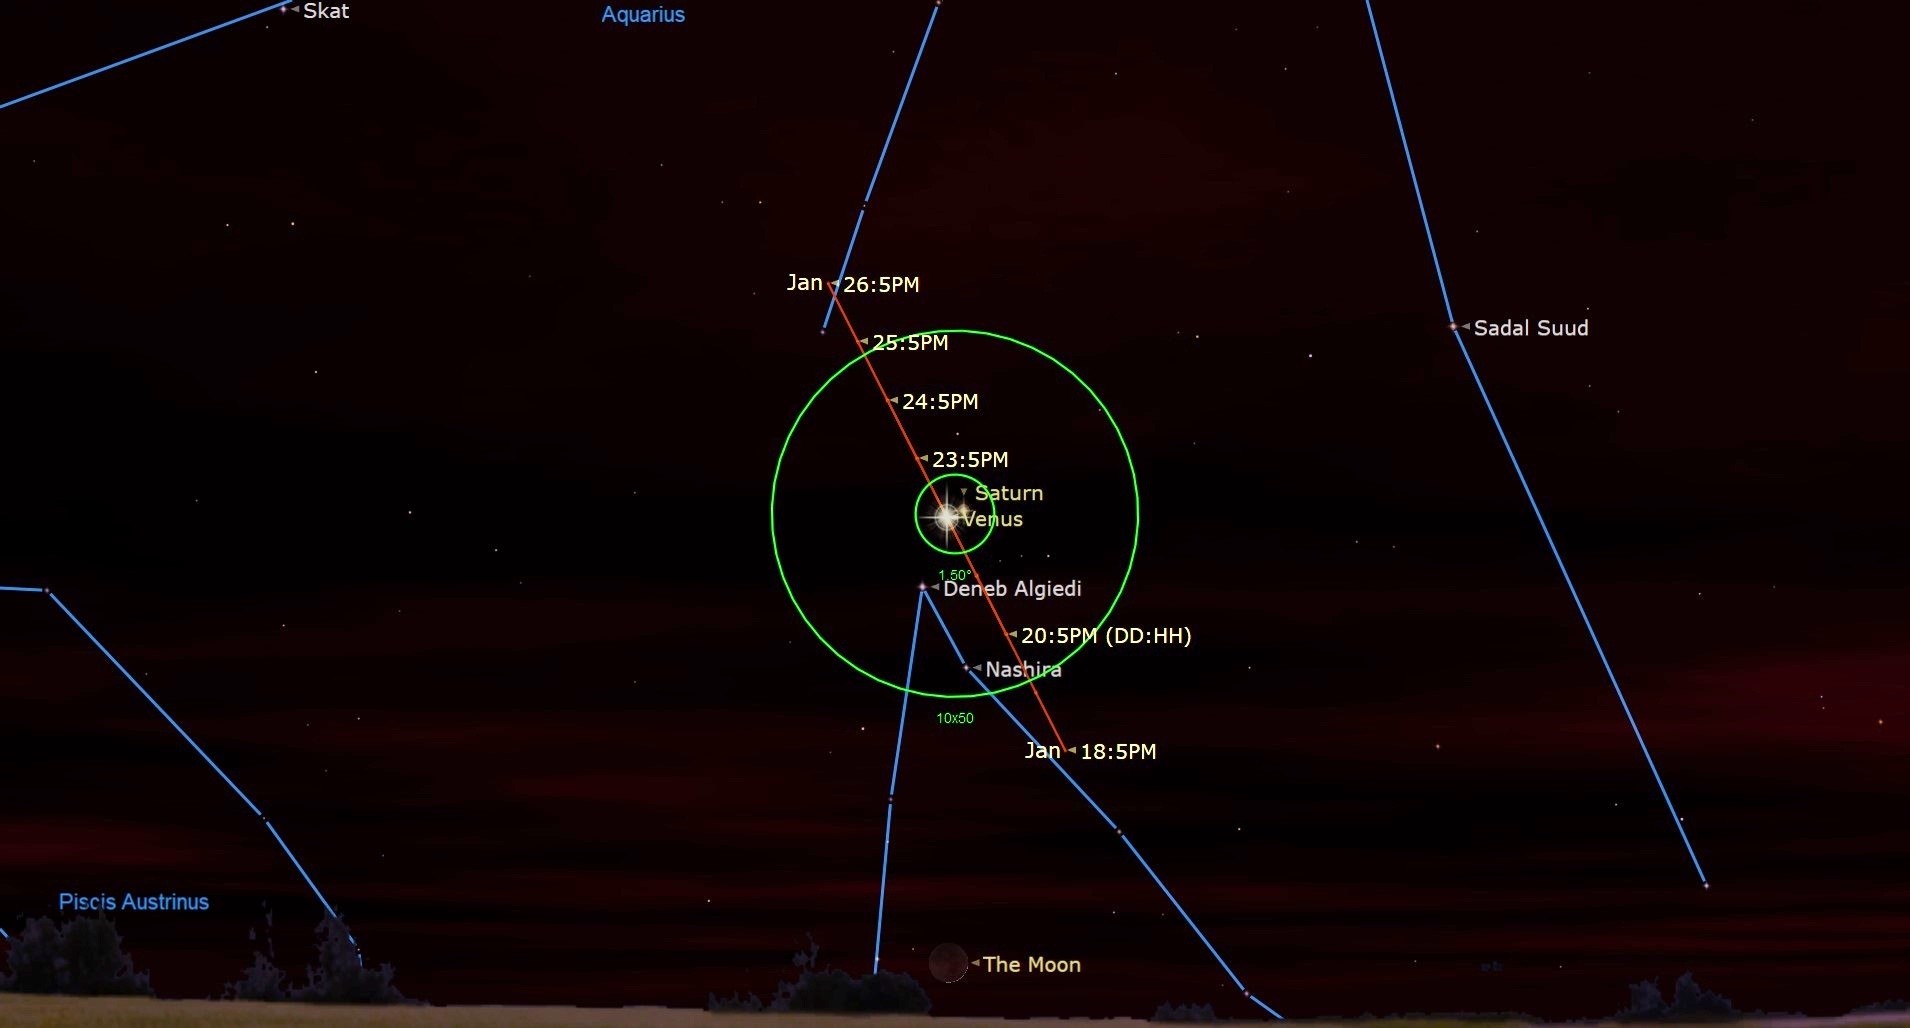 See a 5-planet parade in the night sky this month. Venus and Saturn stand out.